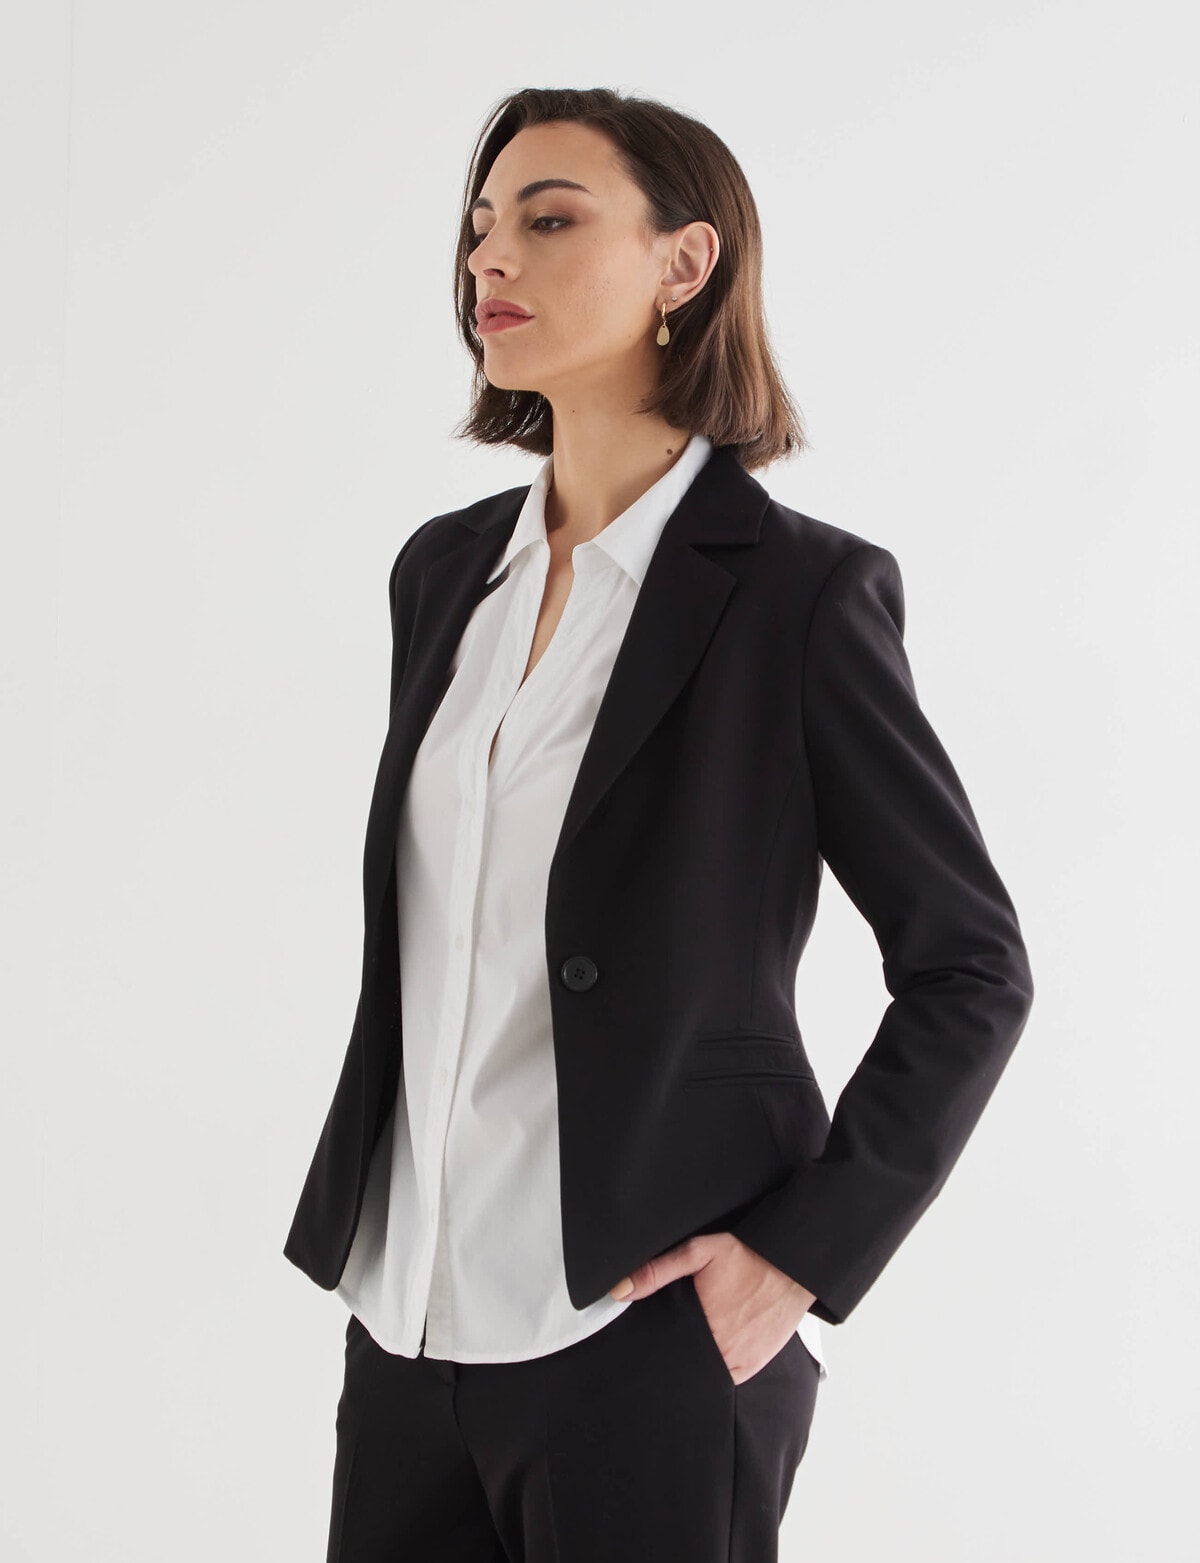 Oliver Black Two-Way-Stretch 1-Button Jacket, Black - Coats & Jackets